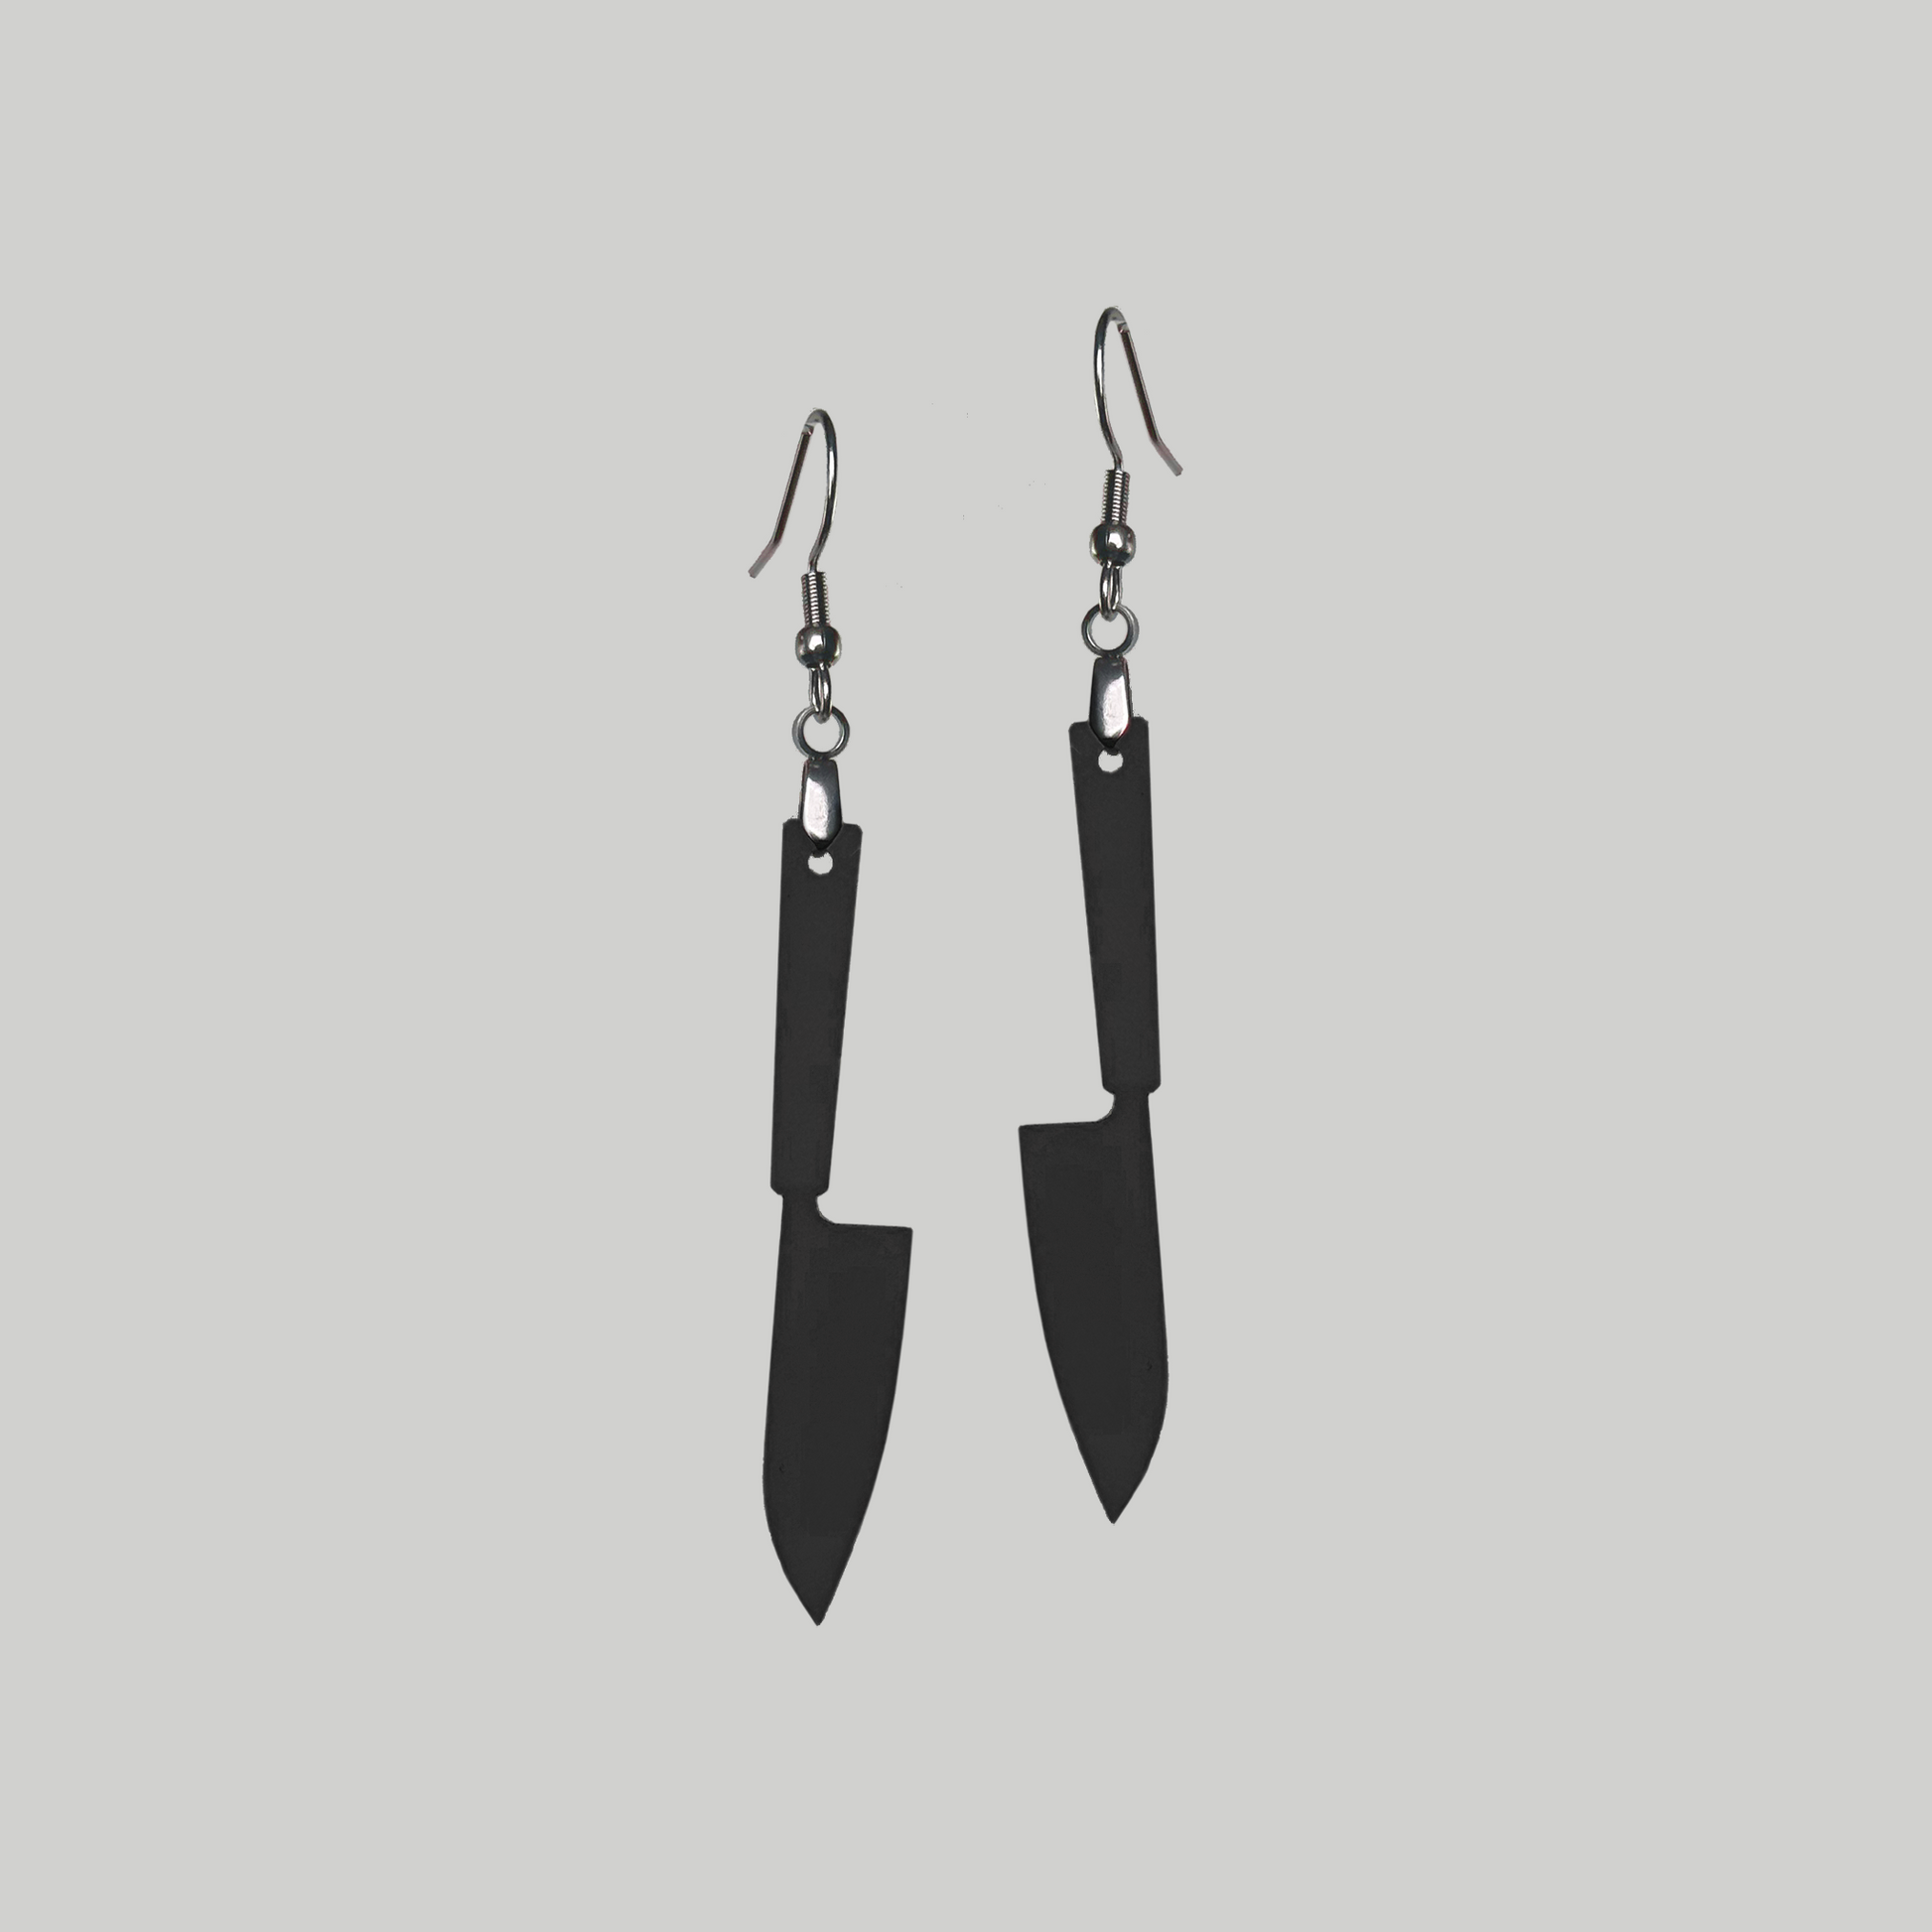 Knife Edge Glam: Make a statement with these knife earrings, blending an edgy aesthetic with a touch of glamorous allure.